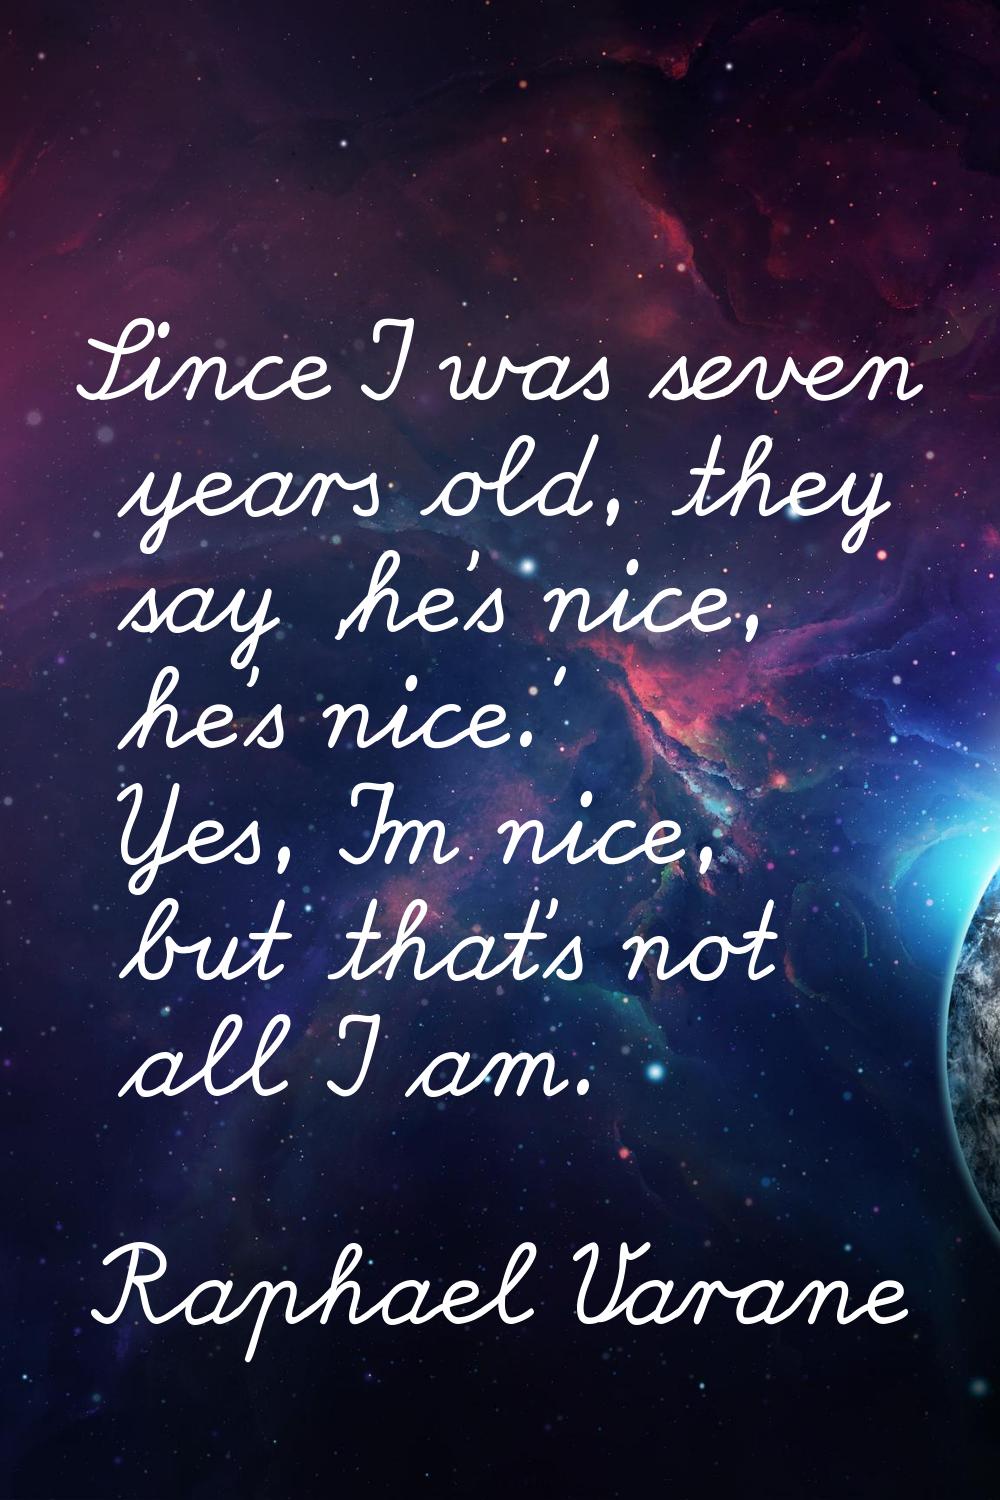 Since I was seven years old, they say 'he's nice, he's nice.' Yes, I'm nice, but that's not all I a